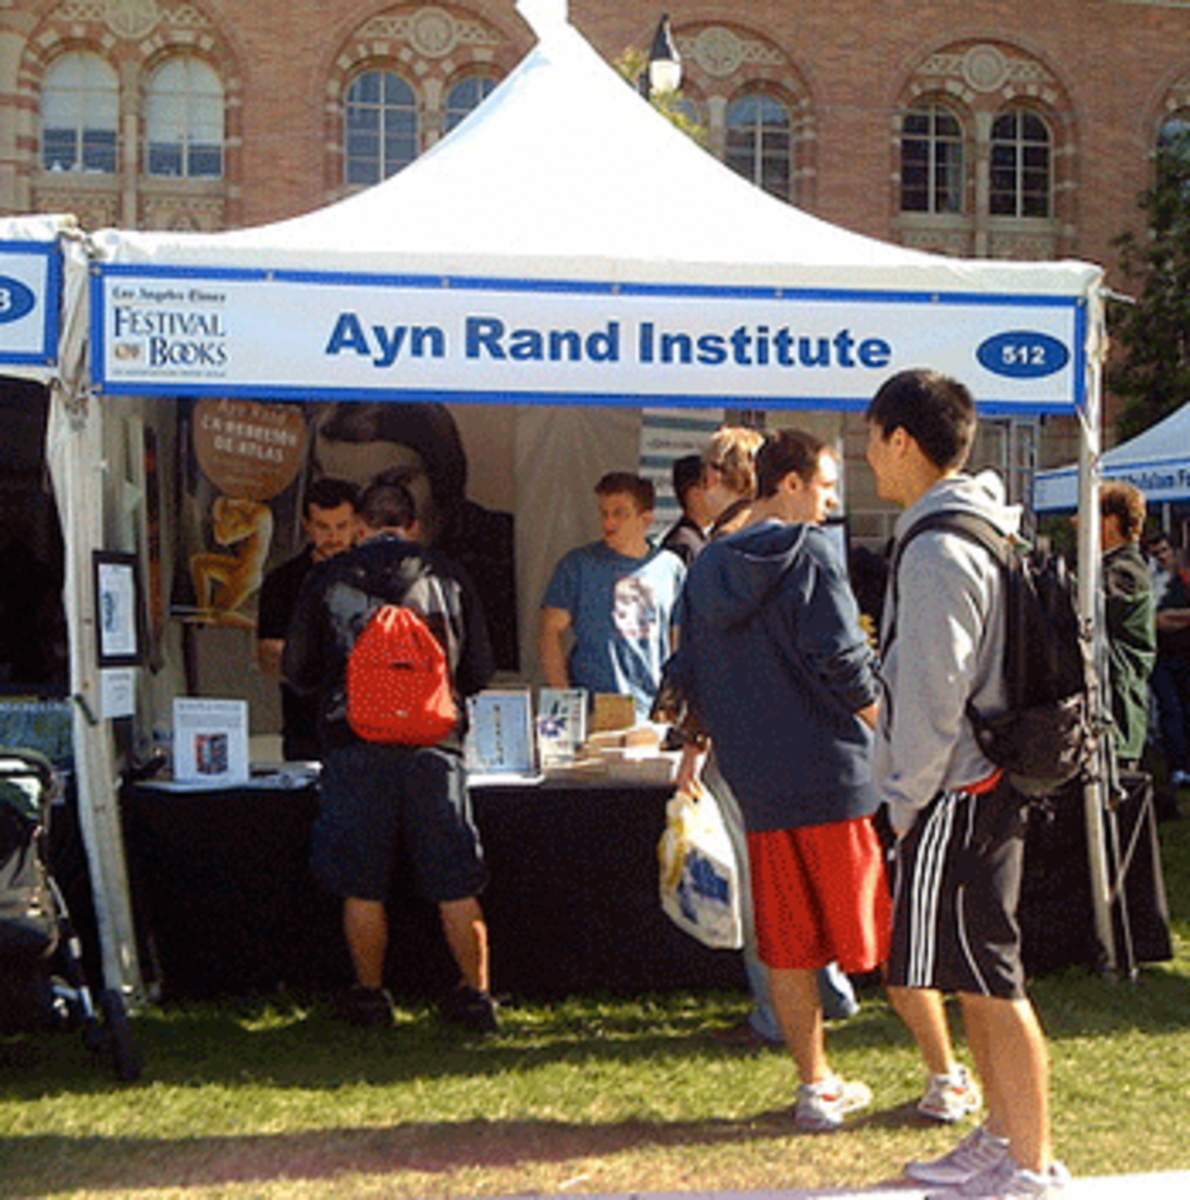 Ayn Rand enjoys resurgent popularity among the younger tea party crowd.